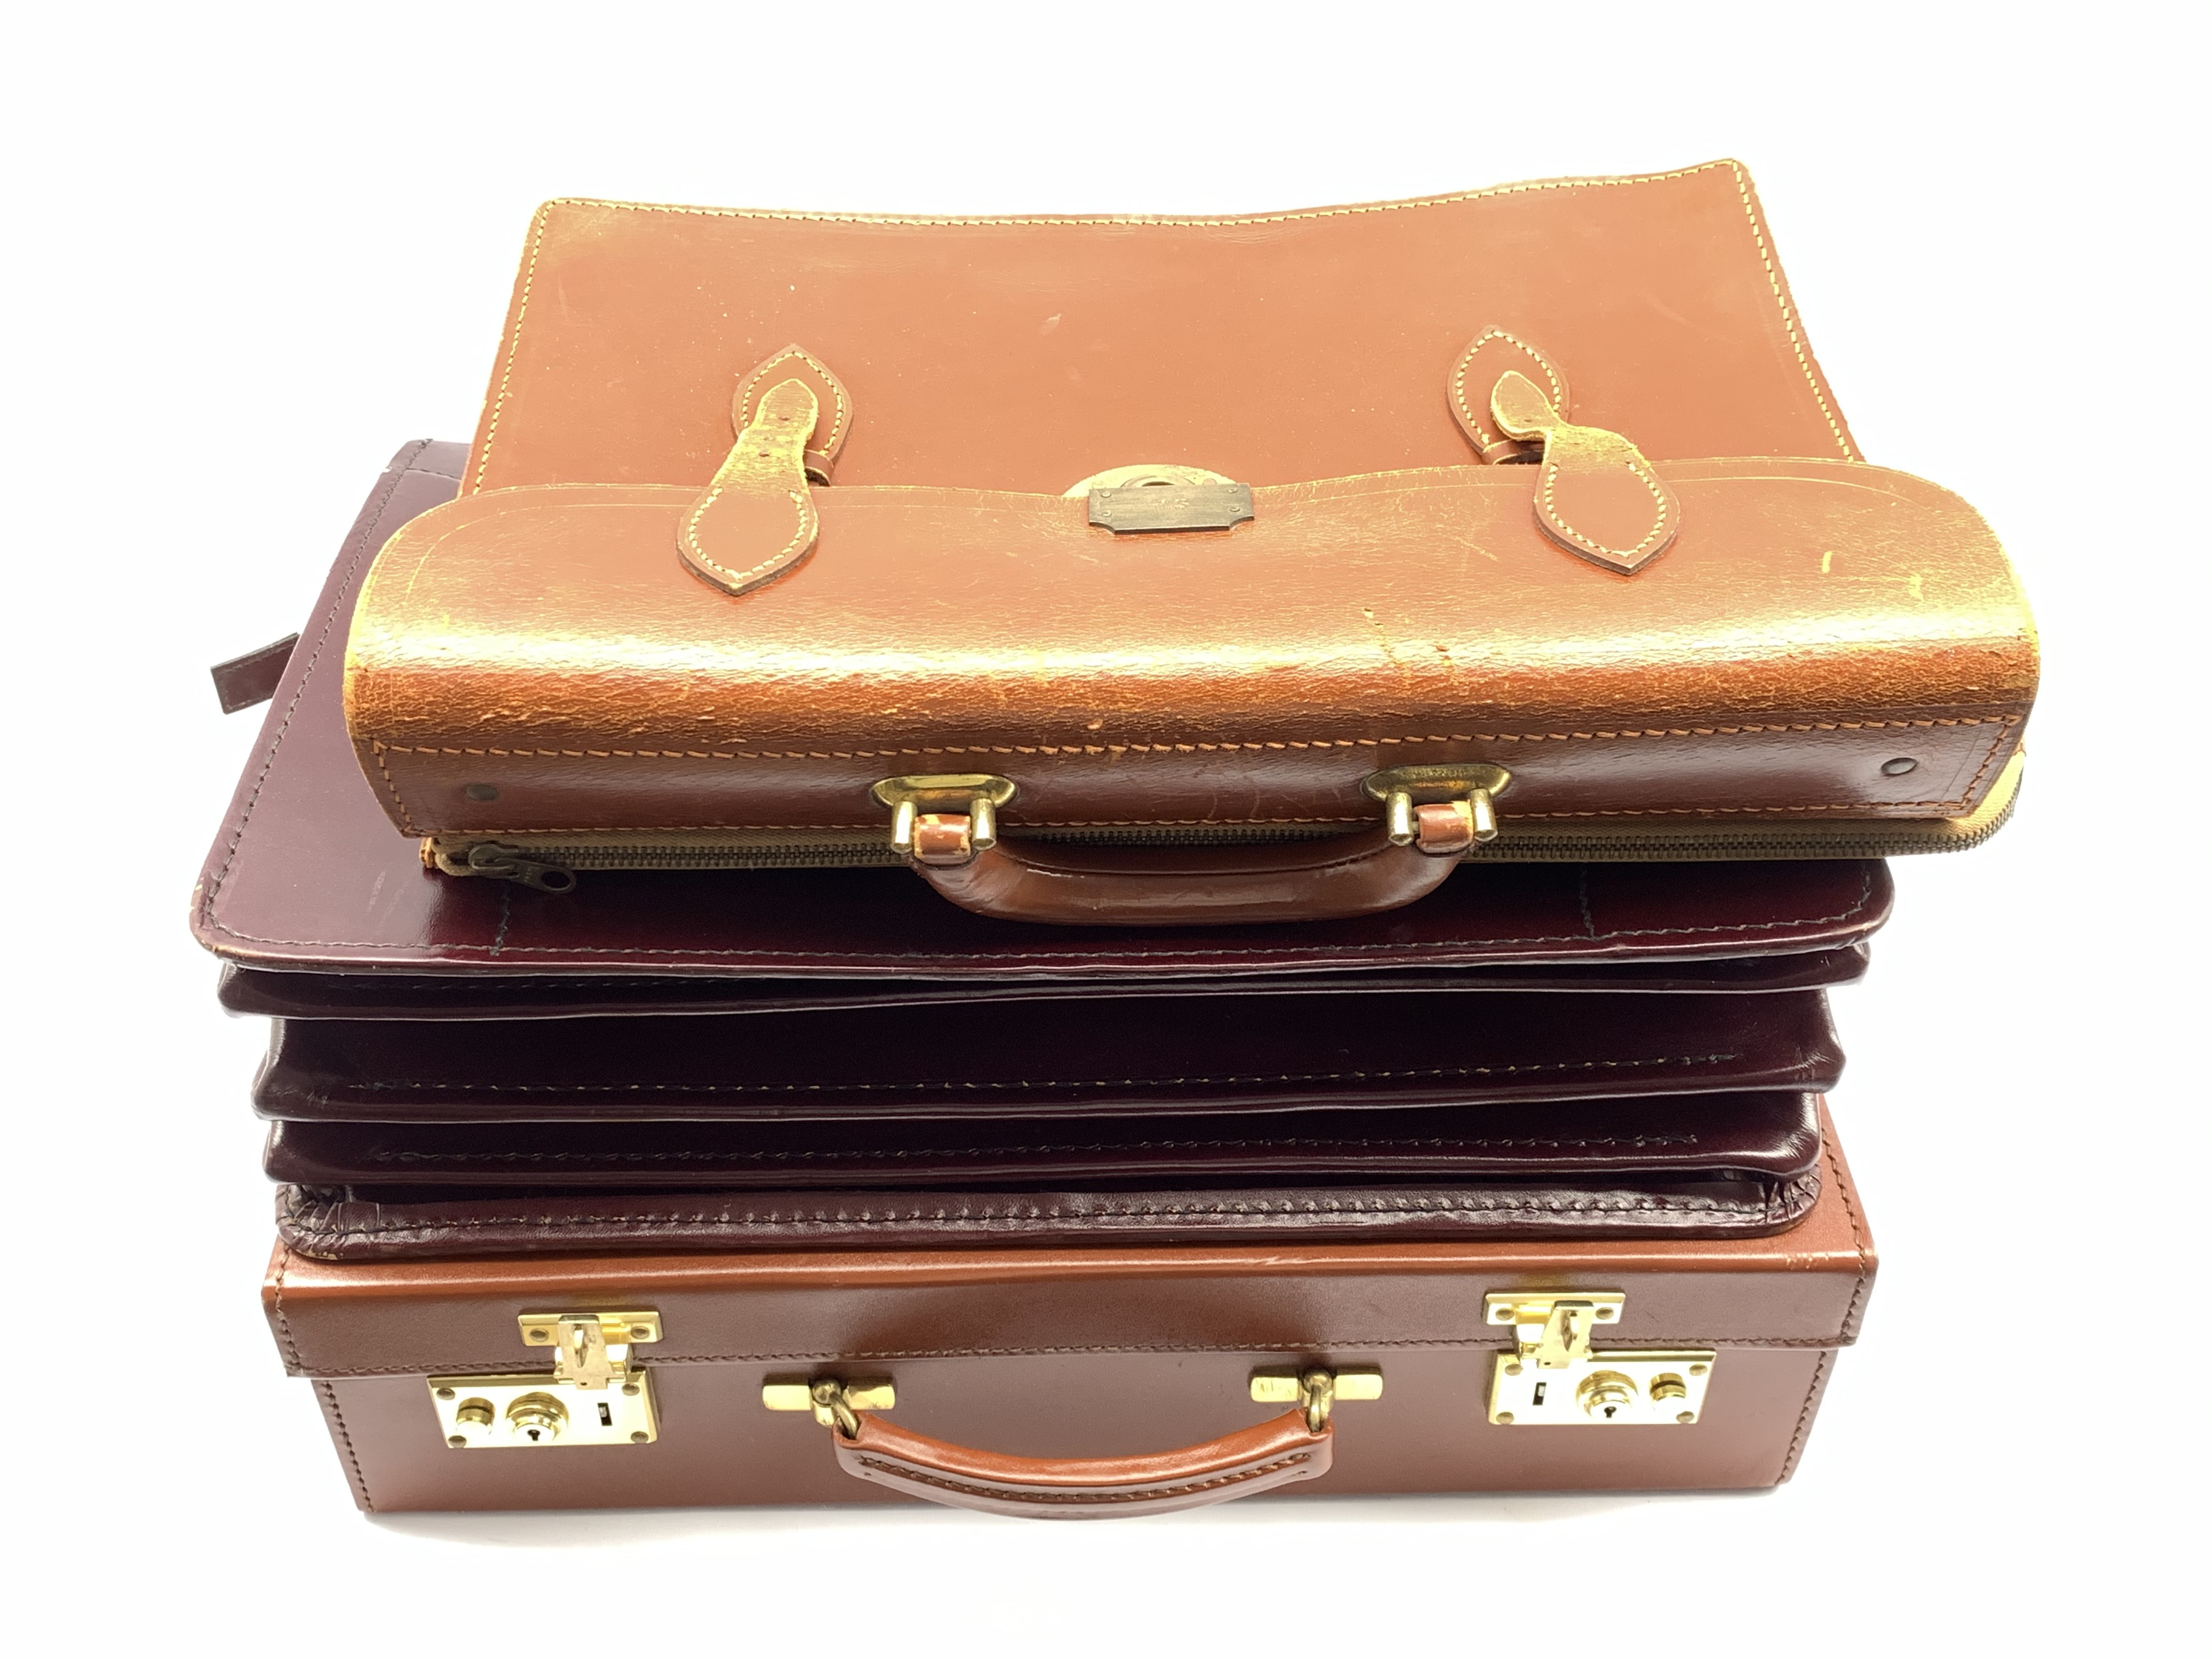 Papworth of Cambridge leather briefcase and document case, together with a Pendragon cow hide attach